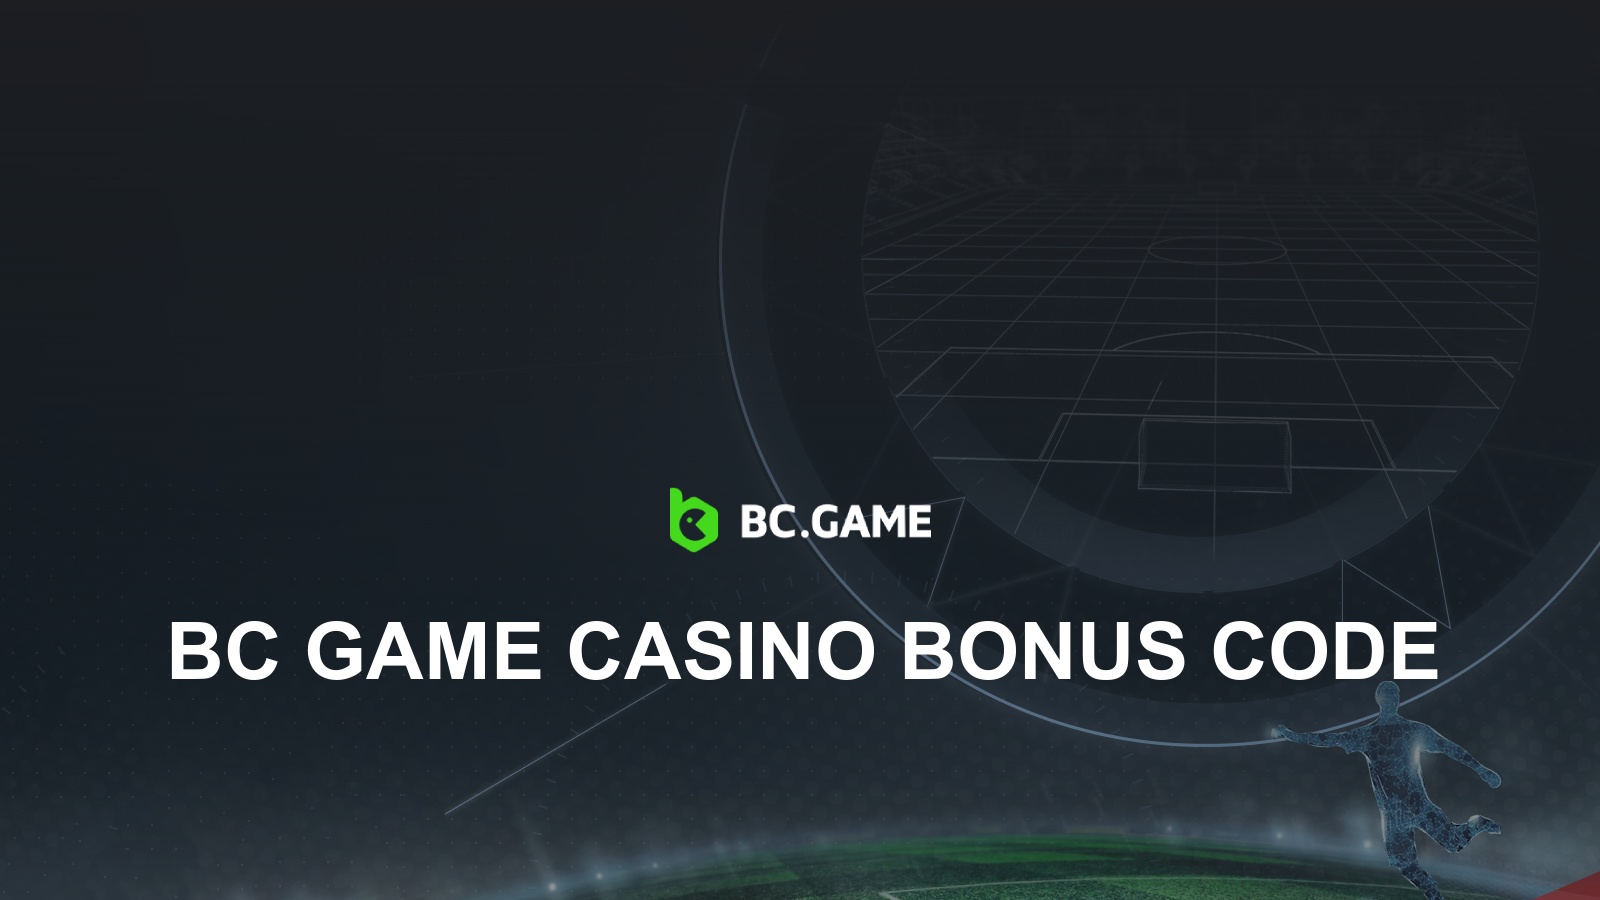 10 Biggest BC Game redeem bonus code Mistakes You Can Easily Avoid